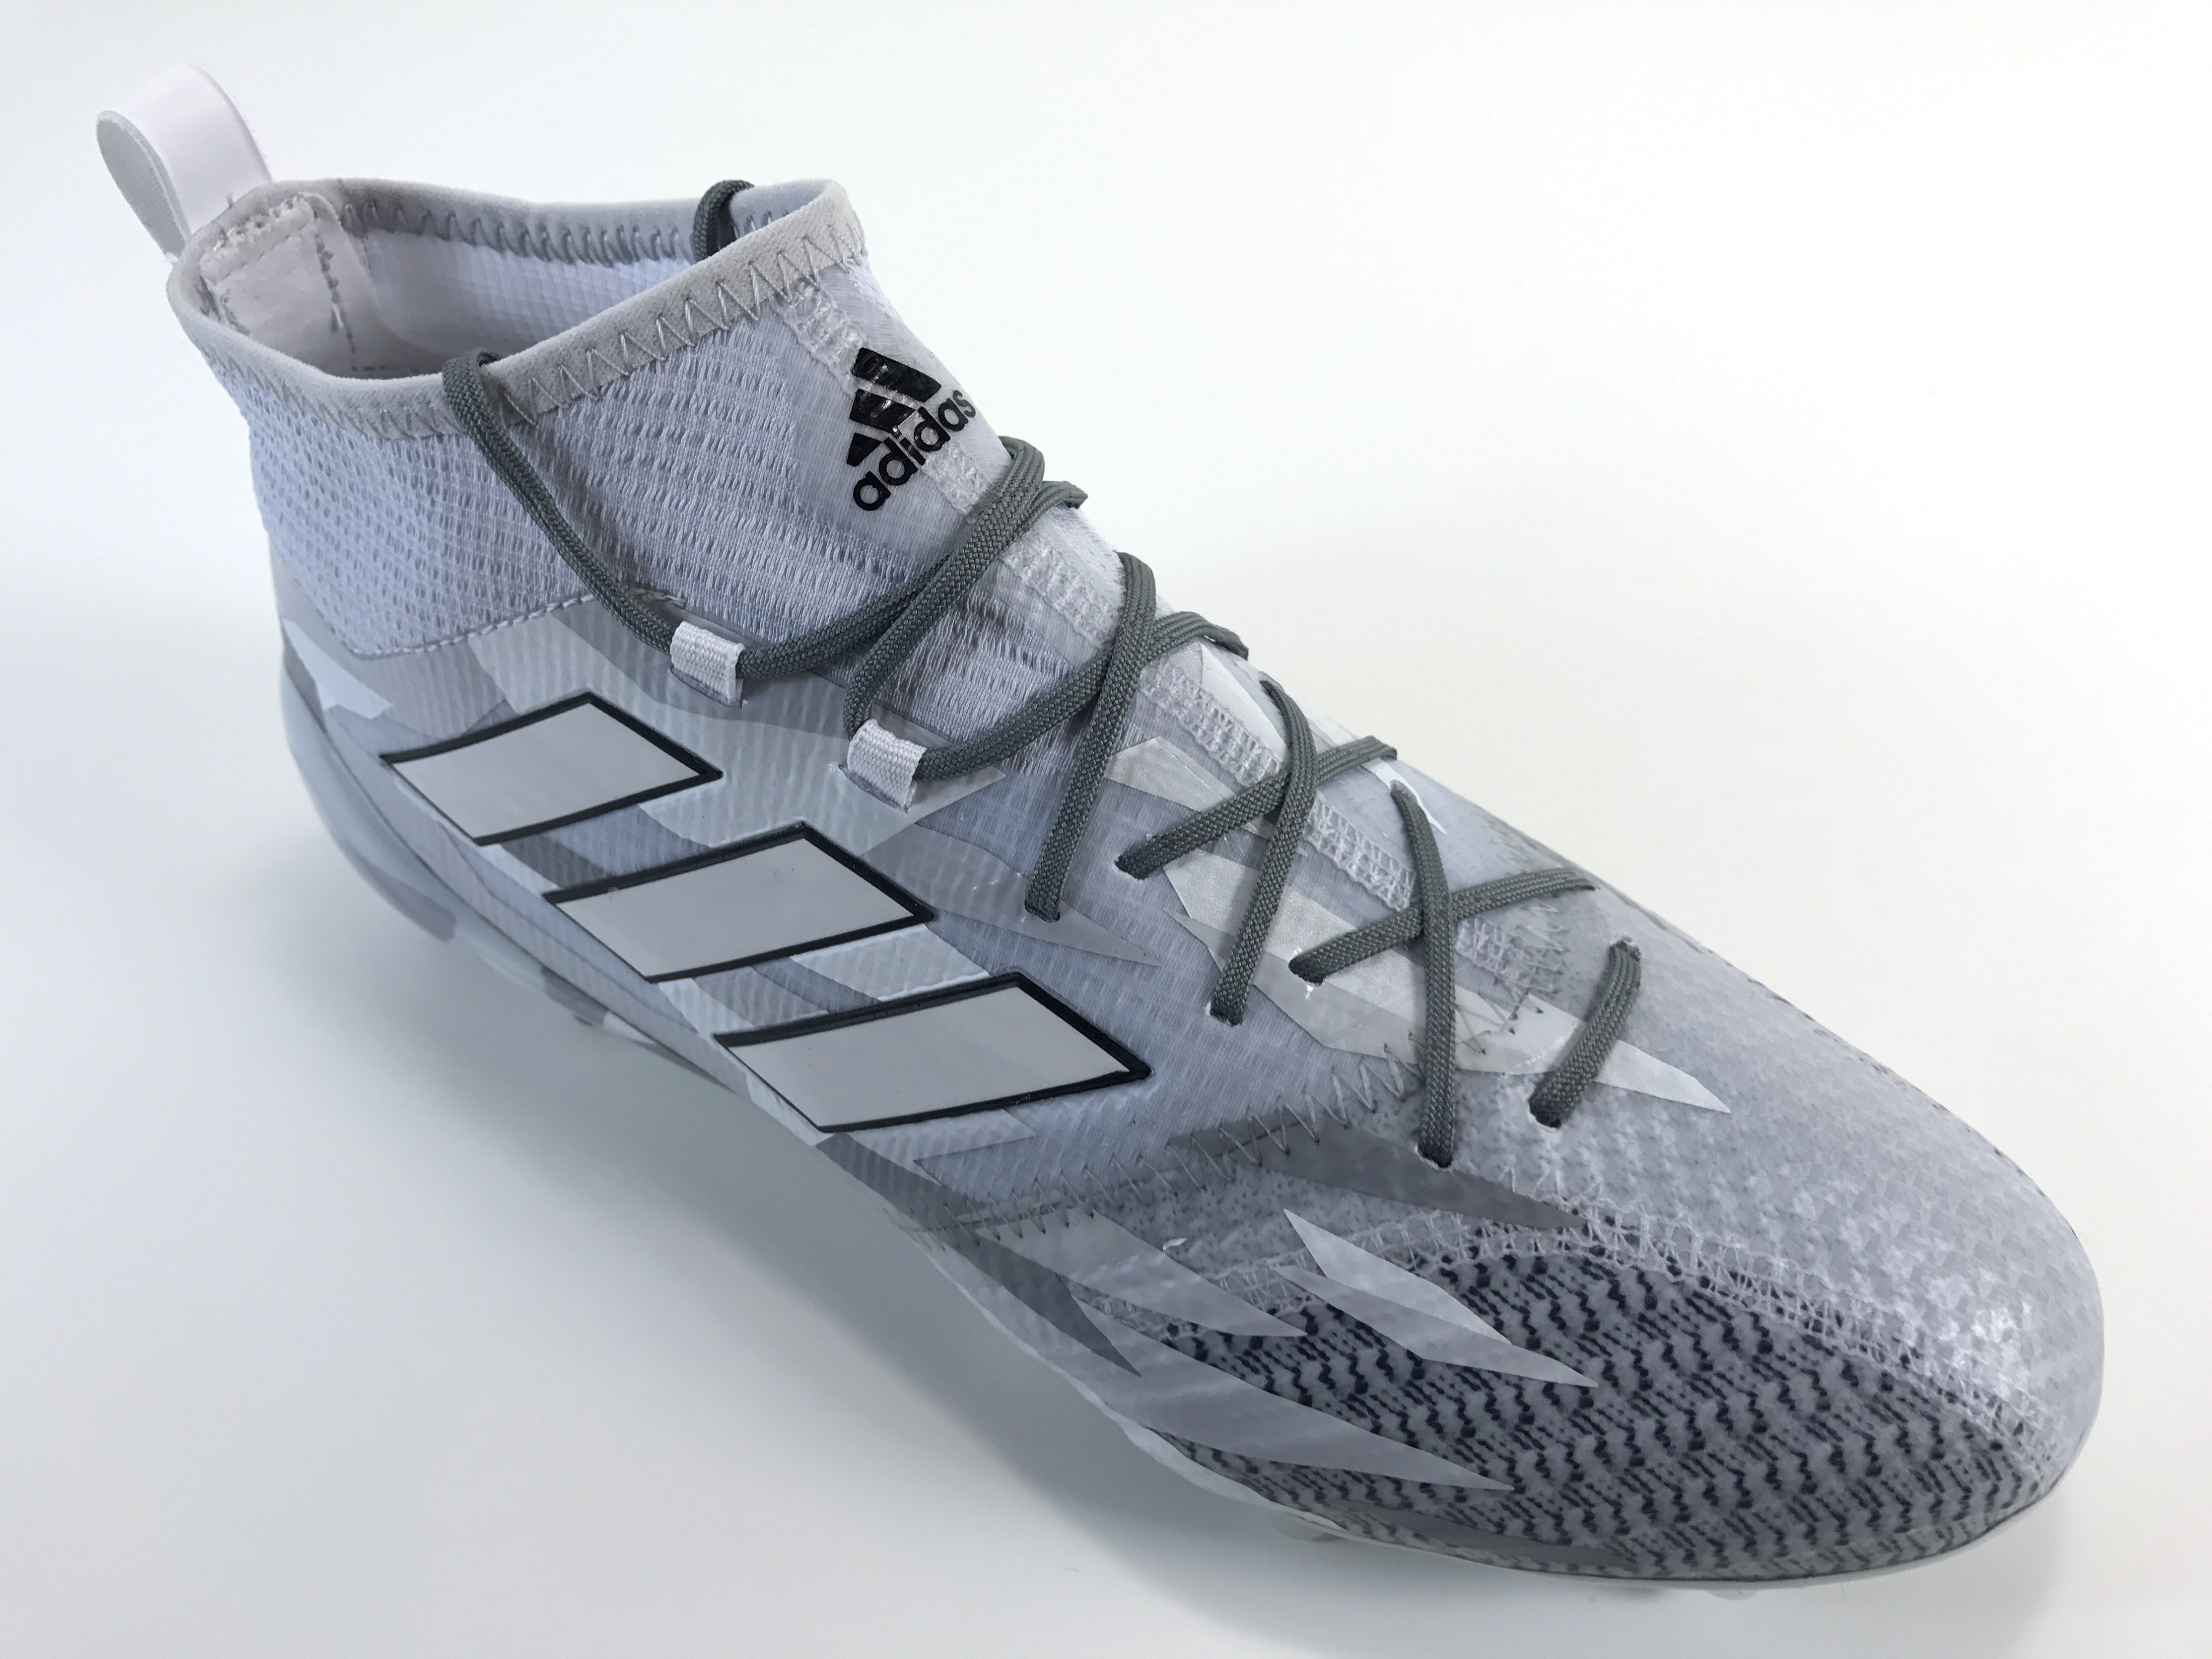 dun Nationale volkstelling stel voor SoccerReviewForYou on Twitter: "SR4U Reflective Steel Grey Soccer Laces on adidas  ACE 17.1 Primeknit Camo Pack https://t.co/gPNmwHVgUQ  https://t.co/A8aS6xw6aP" / Twitter